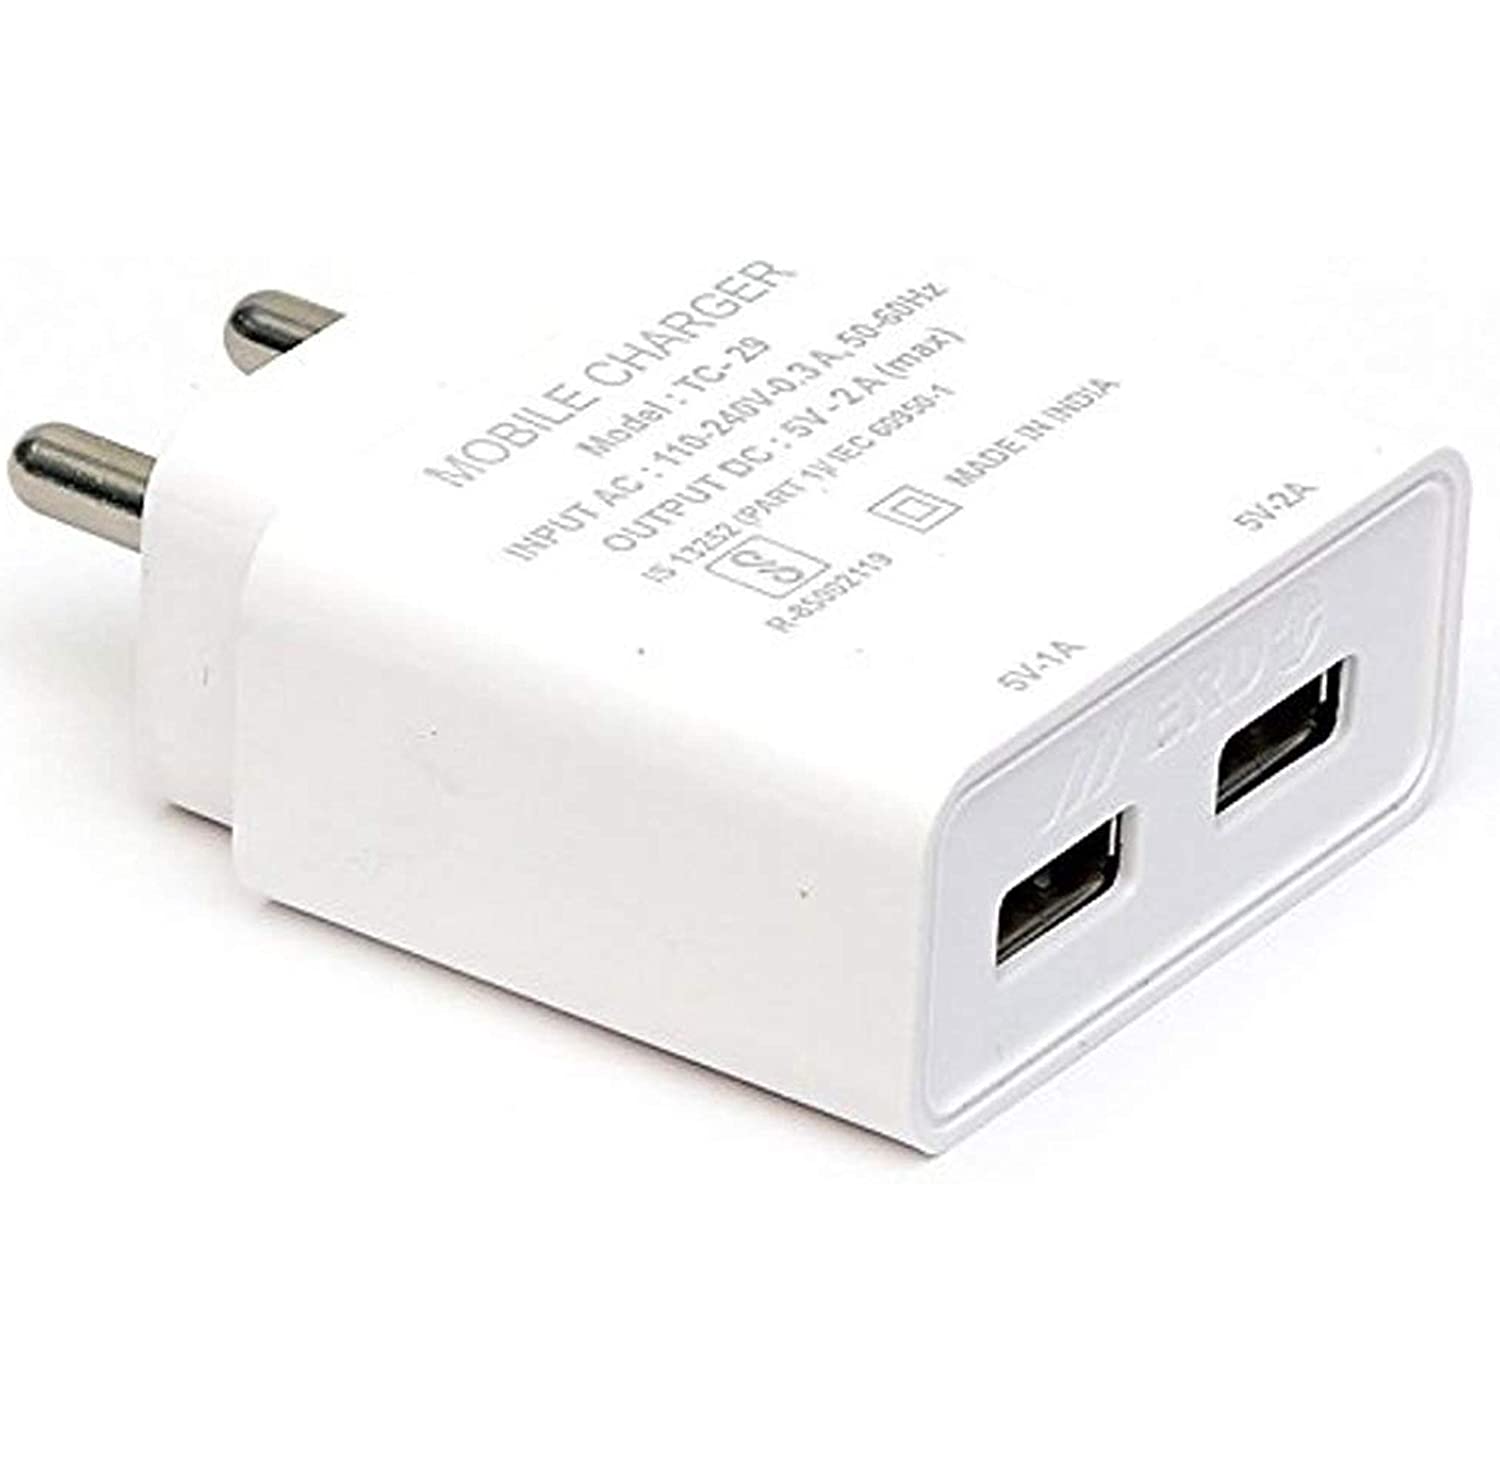  ERD Mobile Charger TC 60 Dual USB Port 2Amp Super Fast Charger with Cable